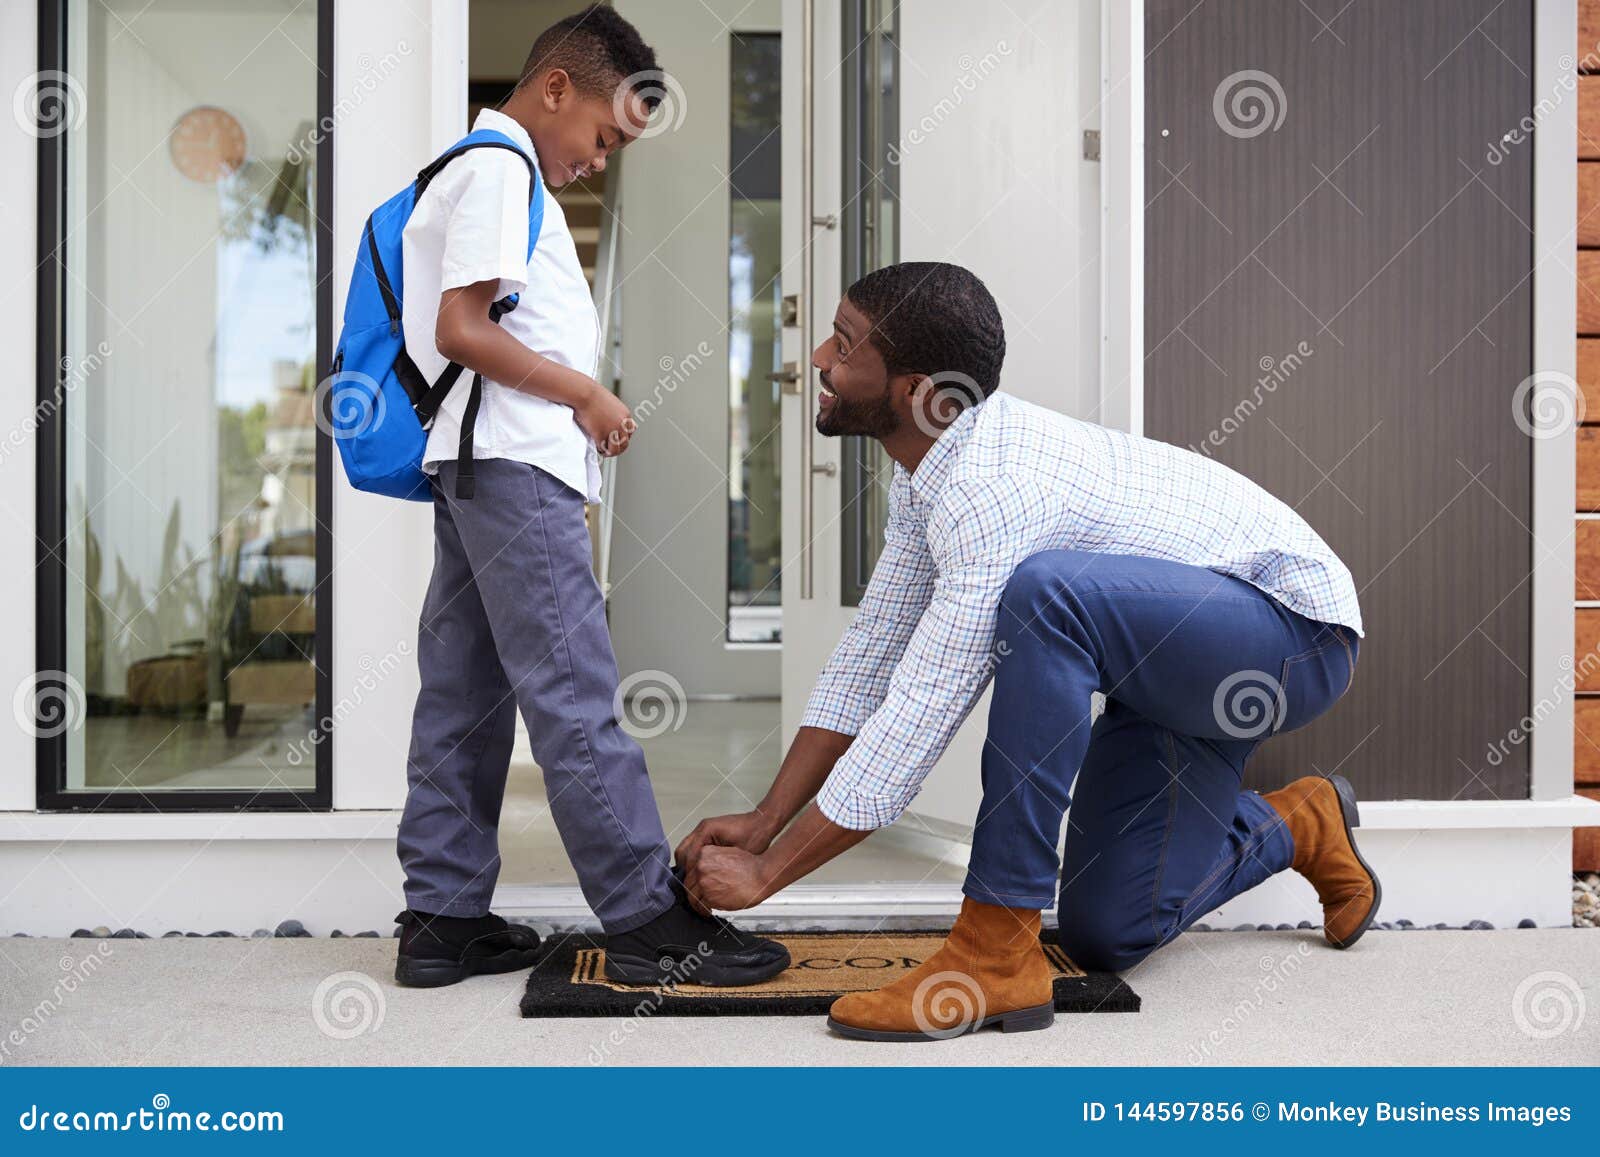 father tying sons shoelaces as he leaves for school